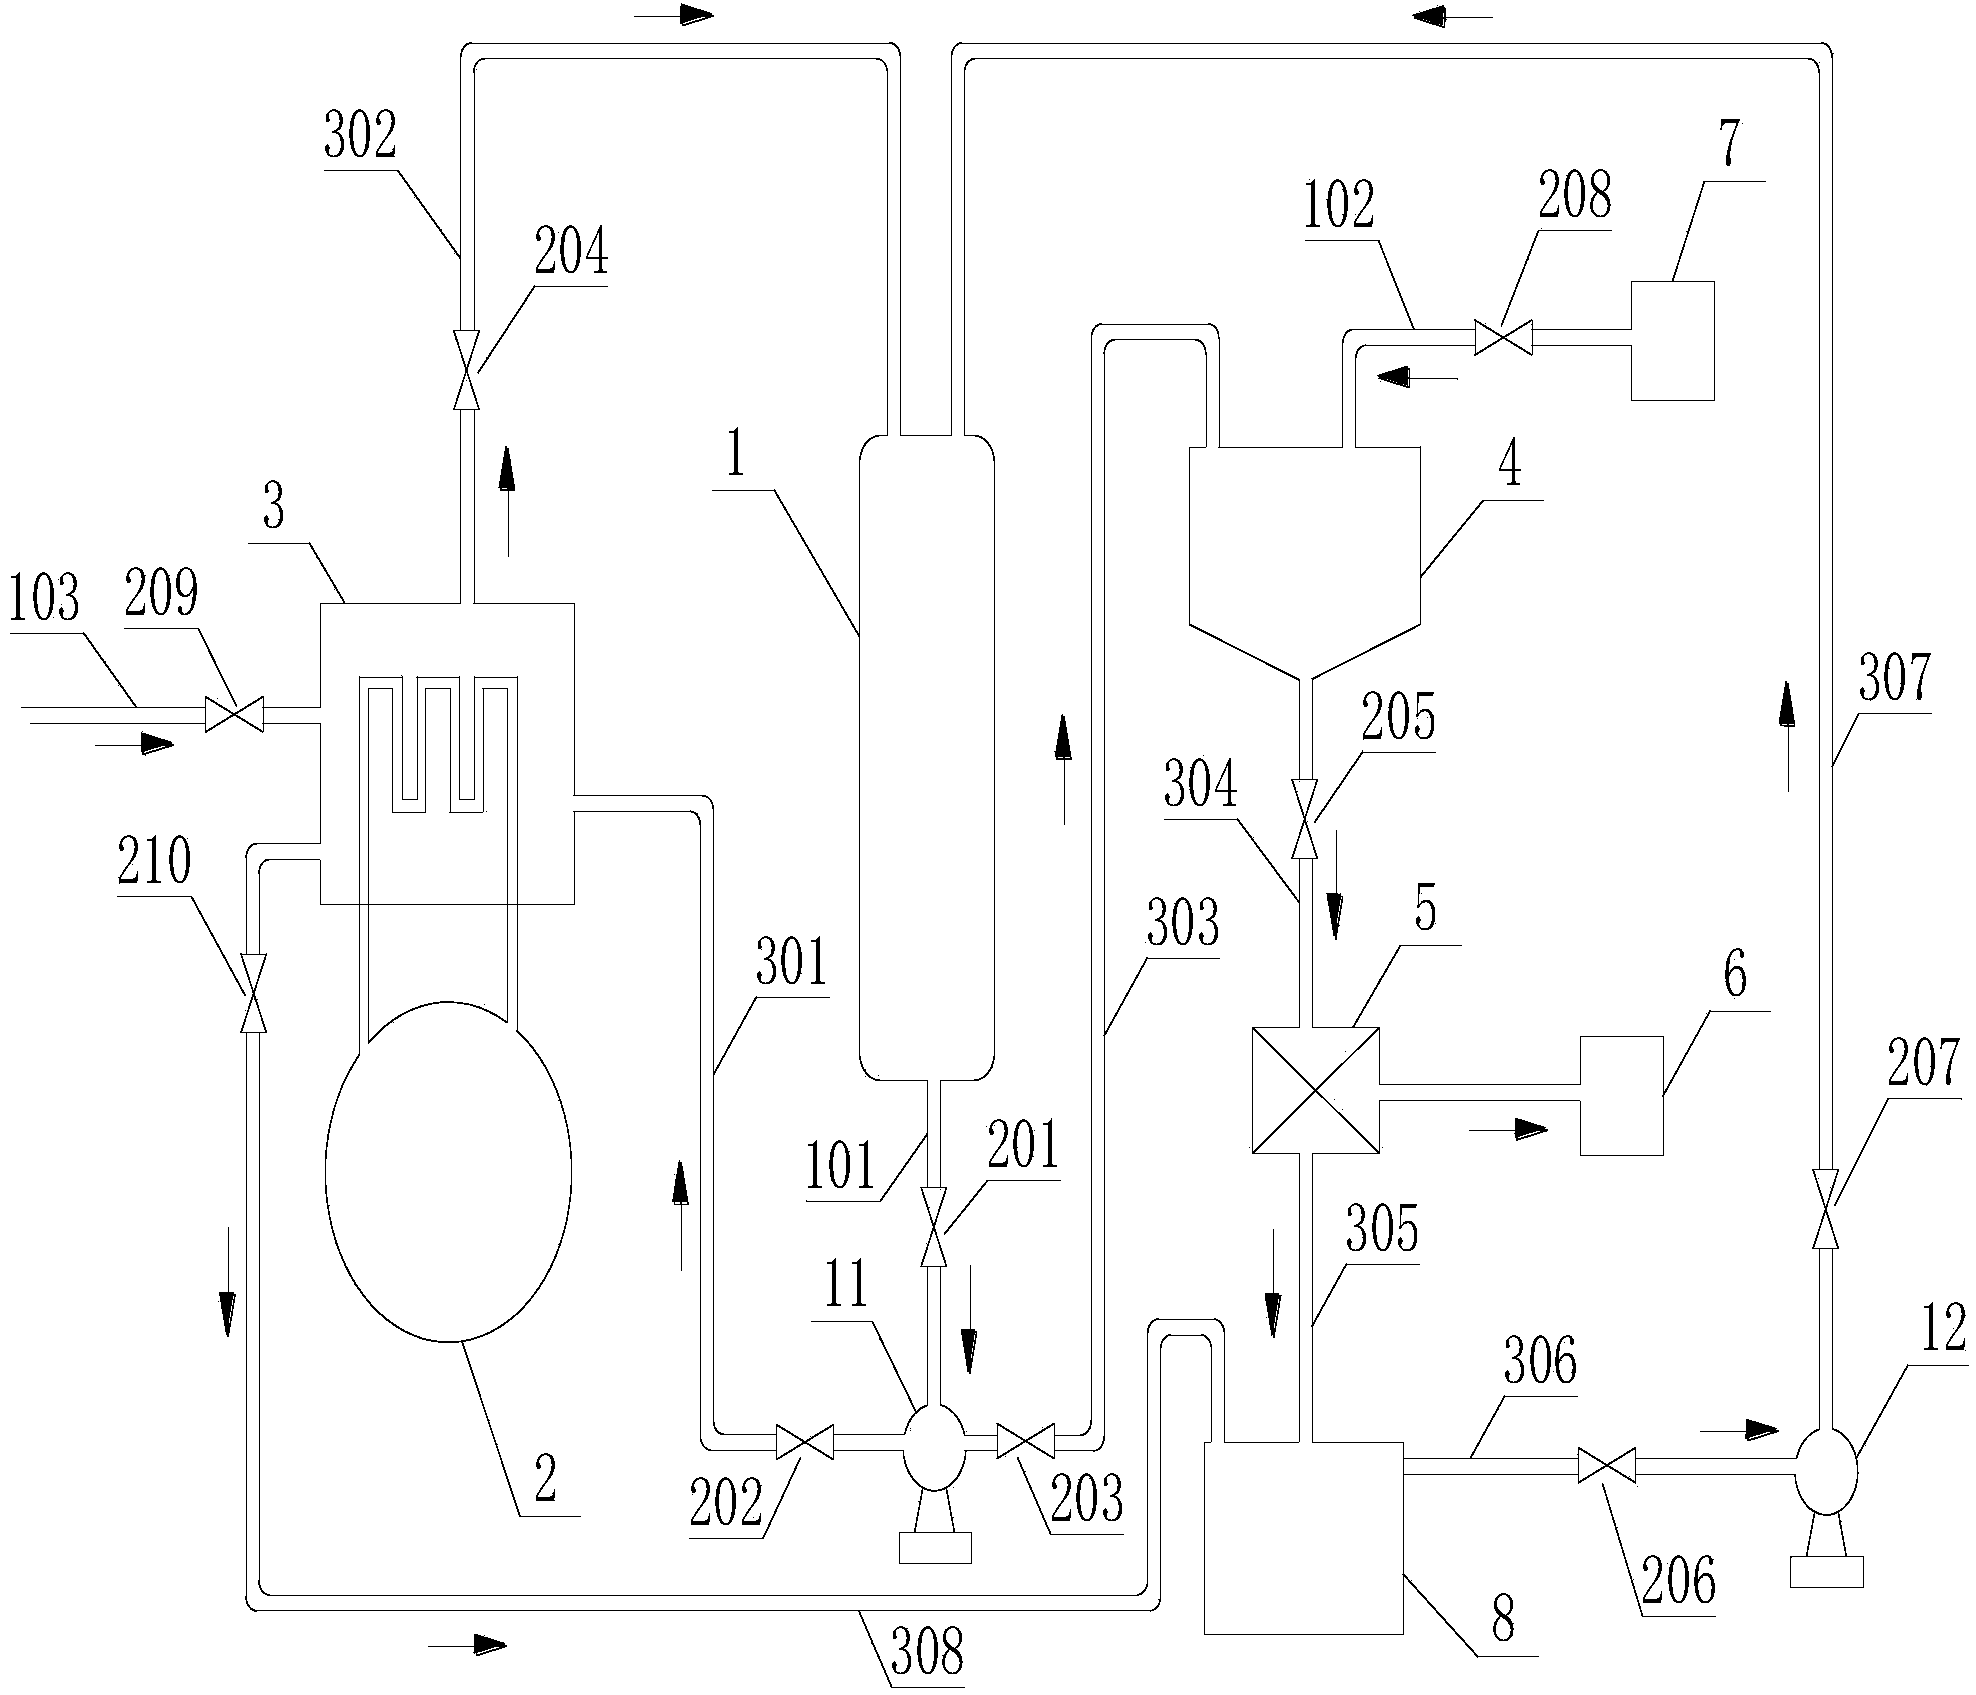 Process for recovering aluminum ions and sulfuric acid from aluminum alloy anodic oxidation tank